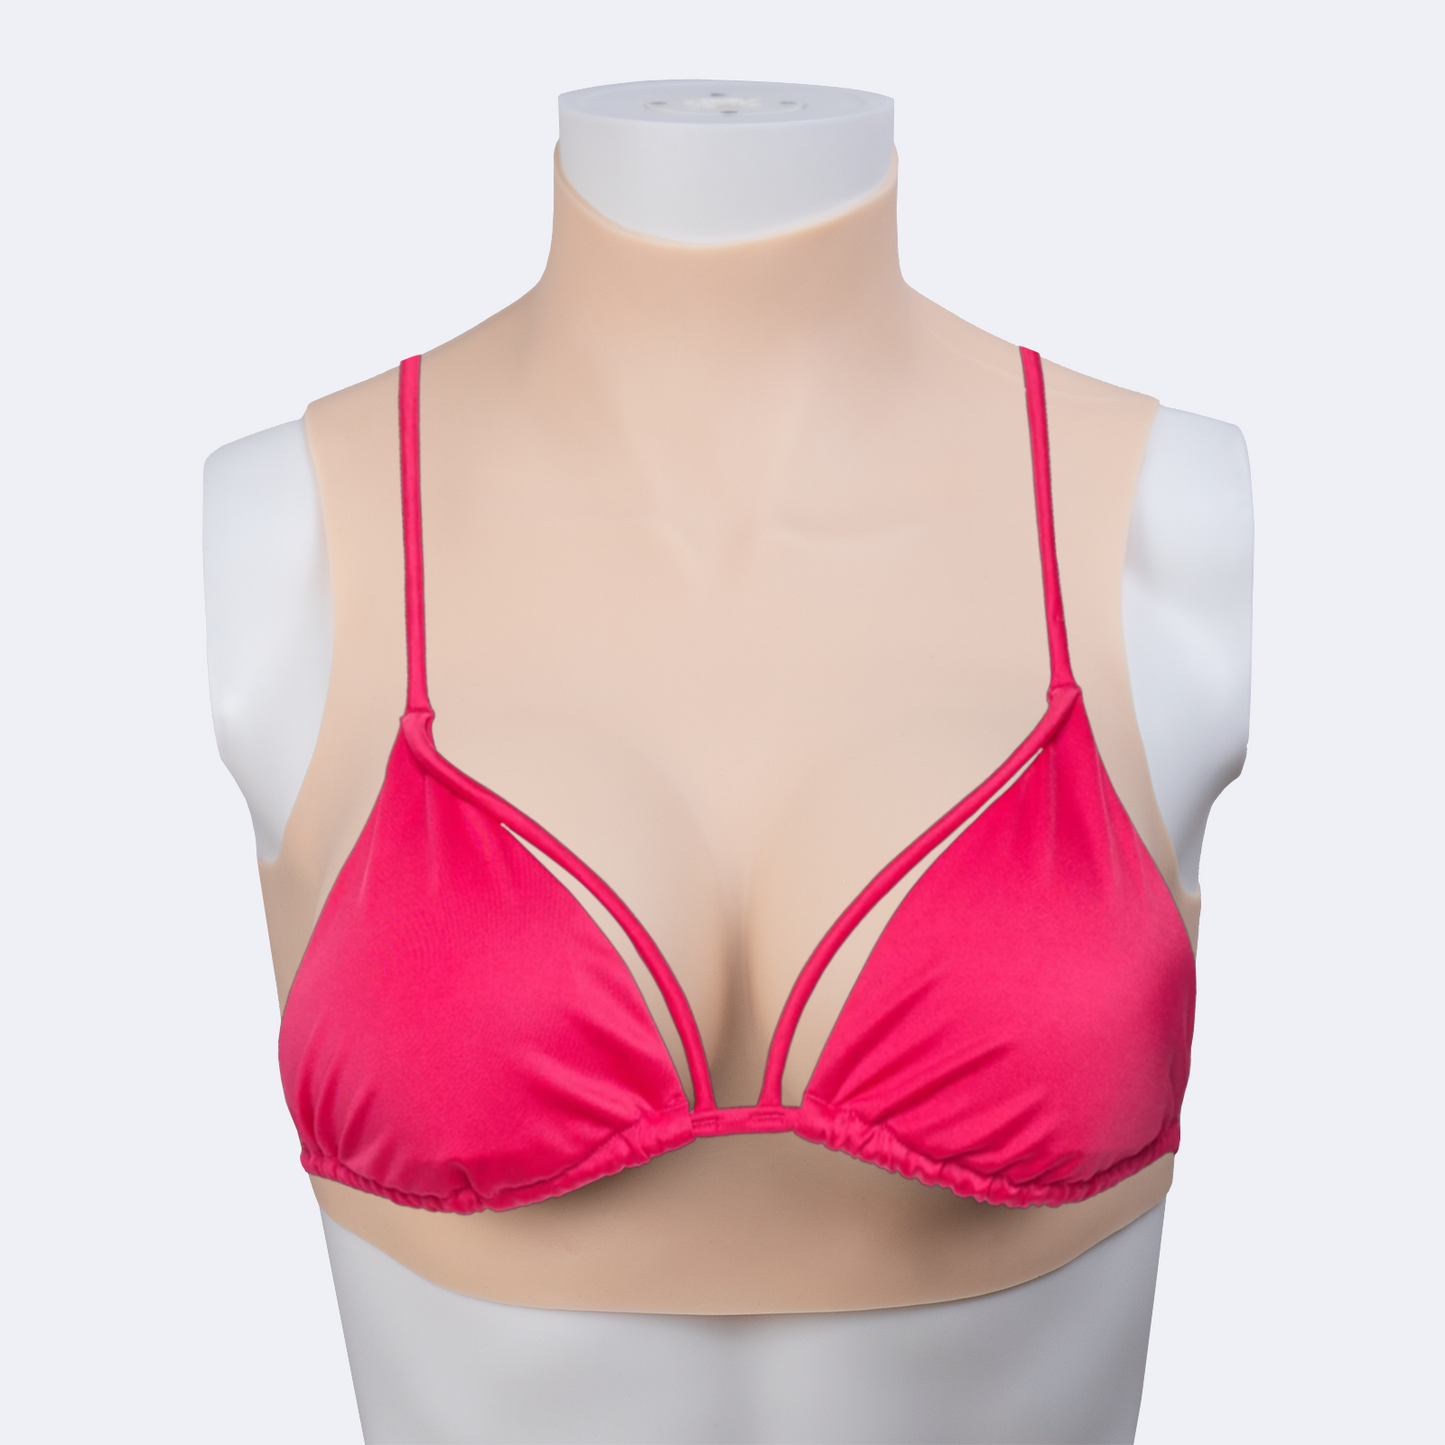 D Cup breast standard size